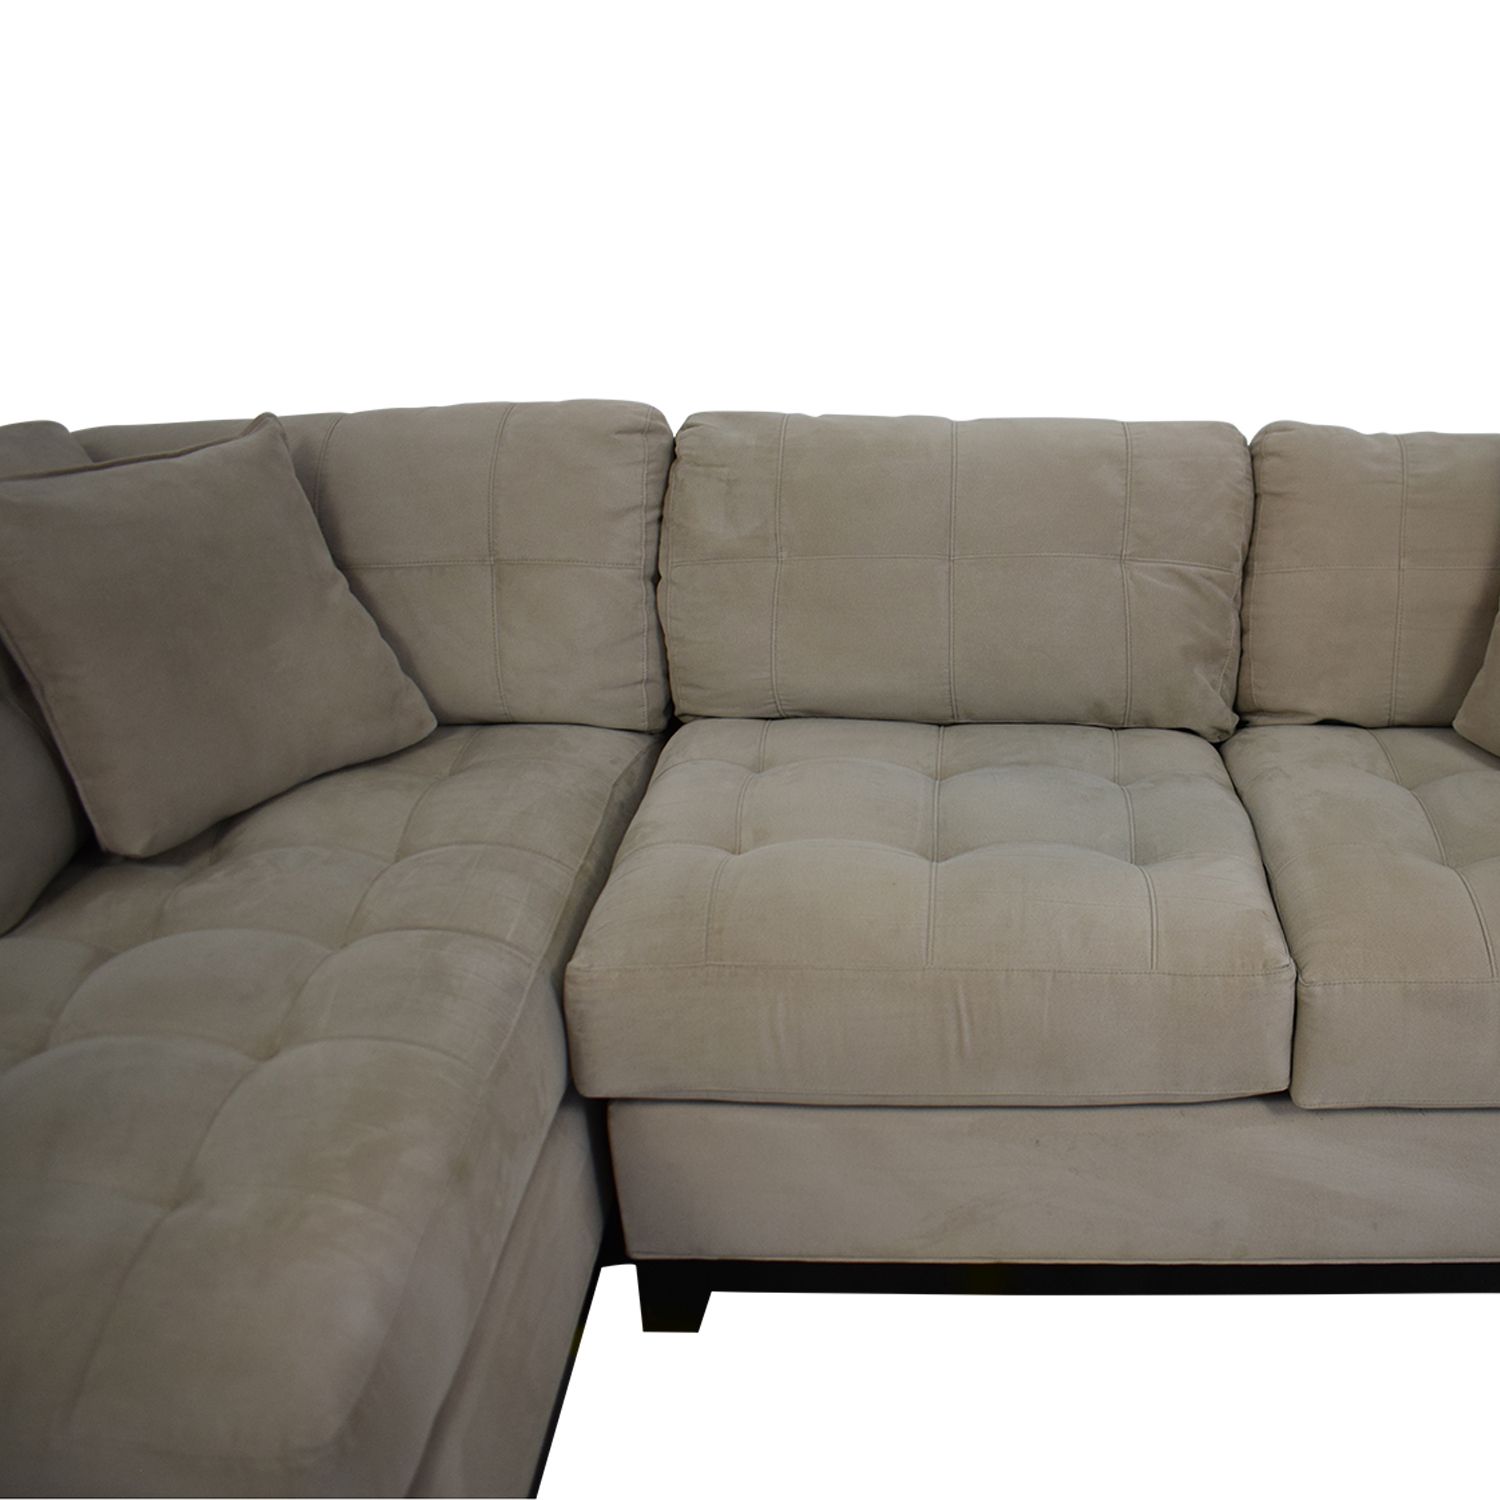 Microfiber Sectional Corner Sofas In Recent Cindy Crawford Home Metropolis Microfiber Sectional Sofa (View 4 of 15)